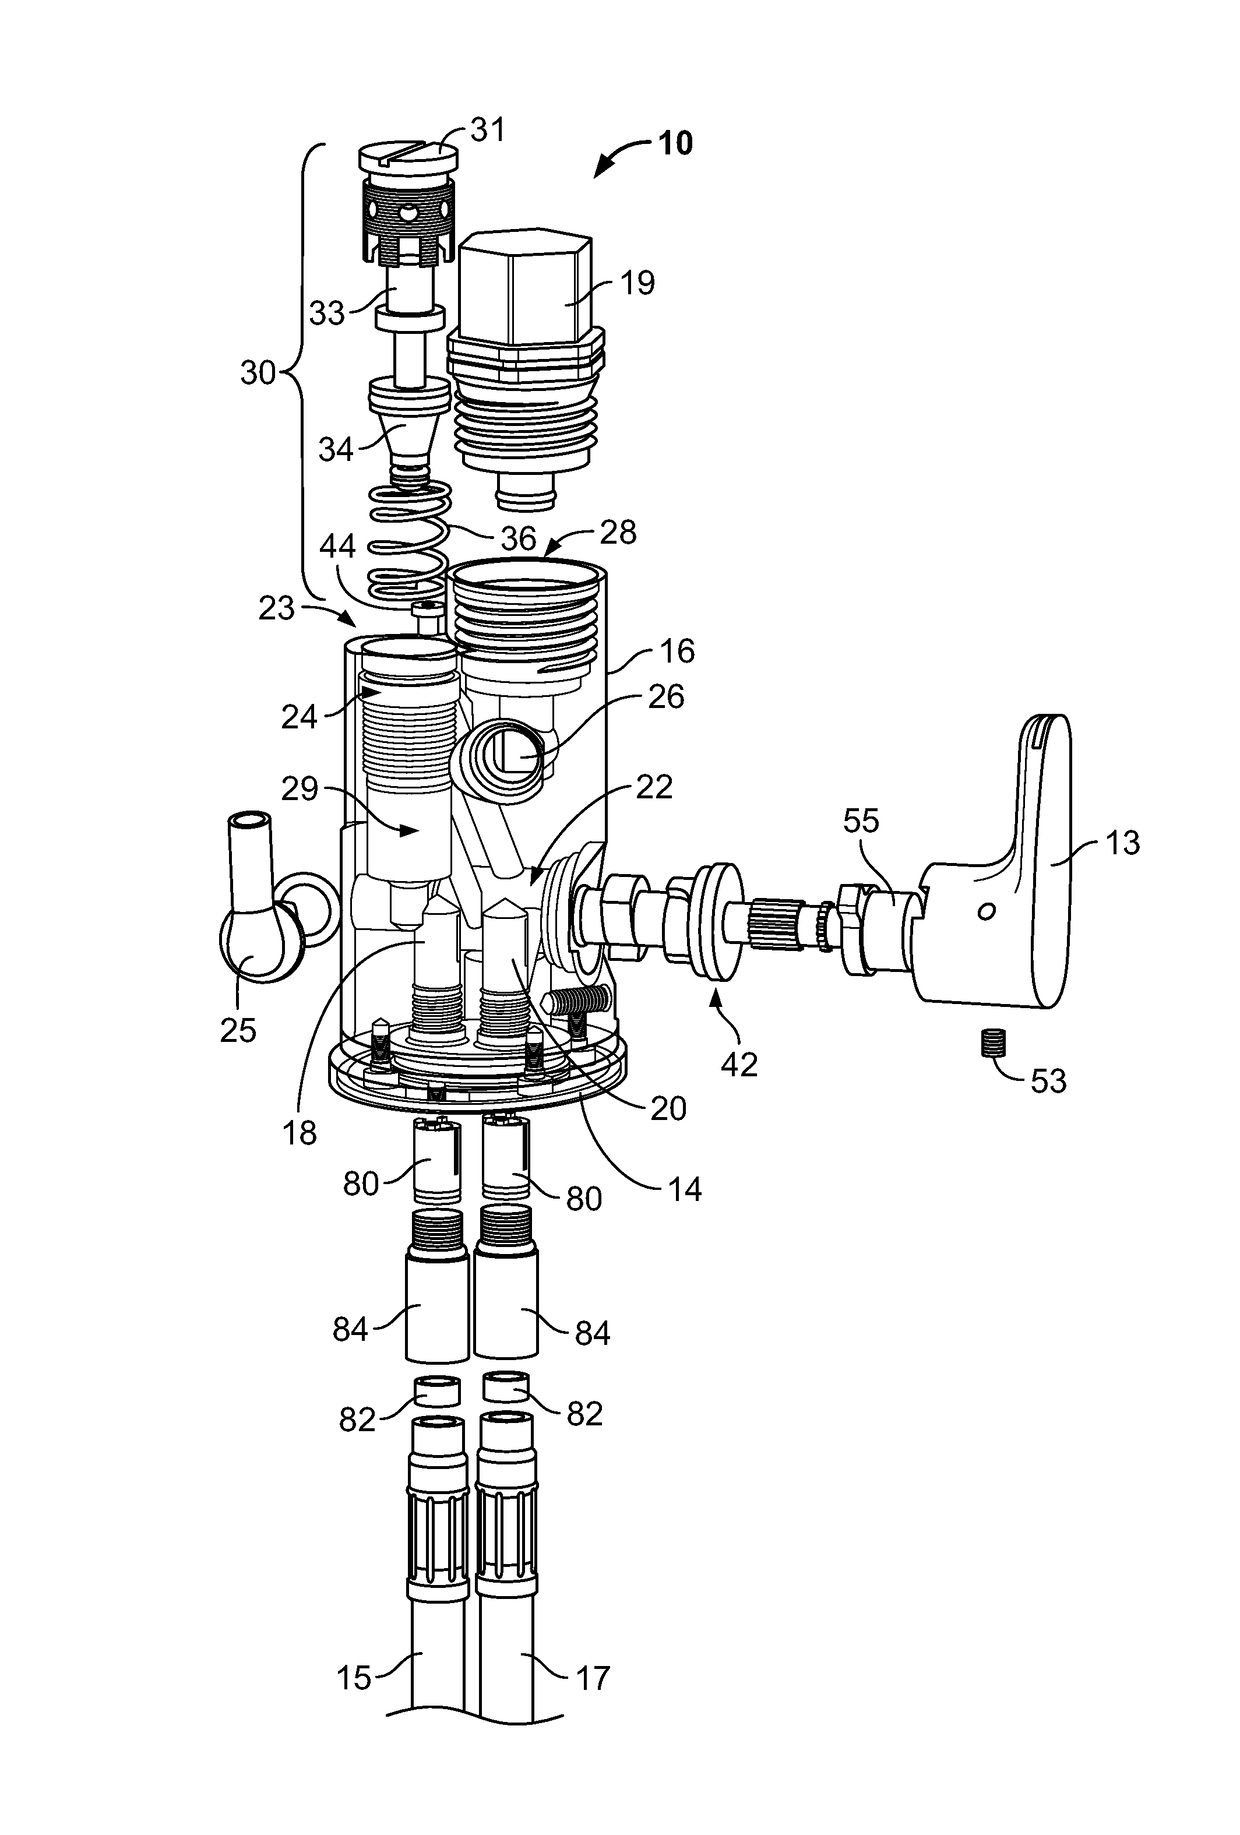 Faucet assembly with integrated anti-scald device